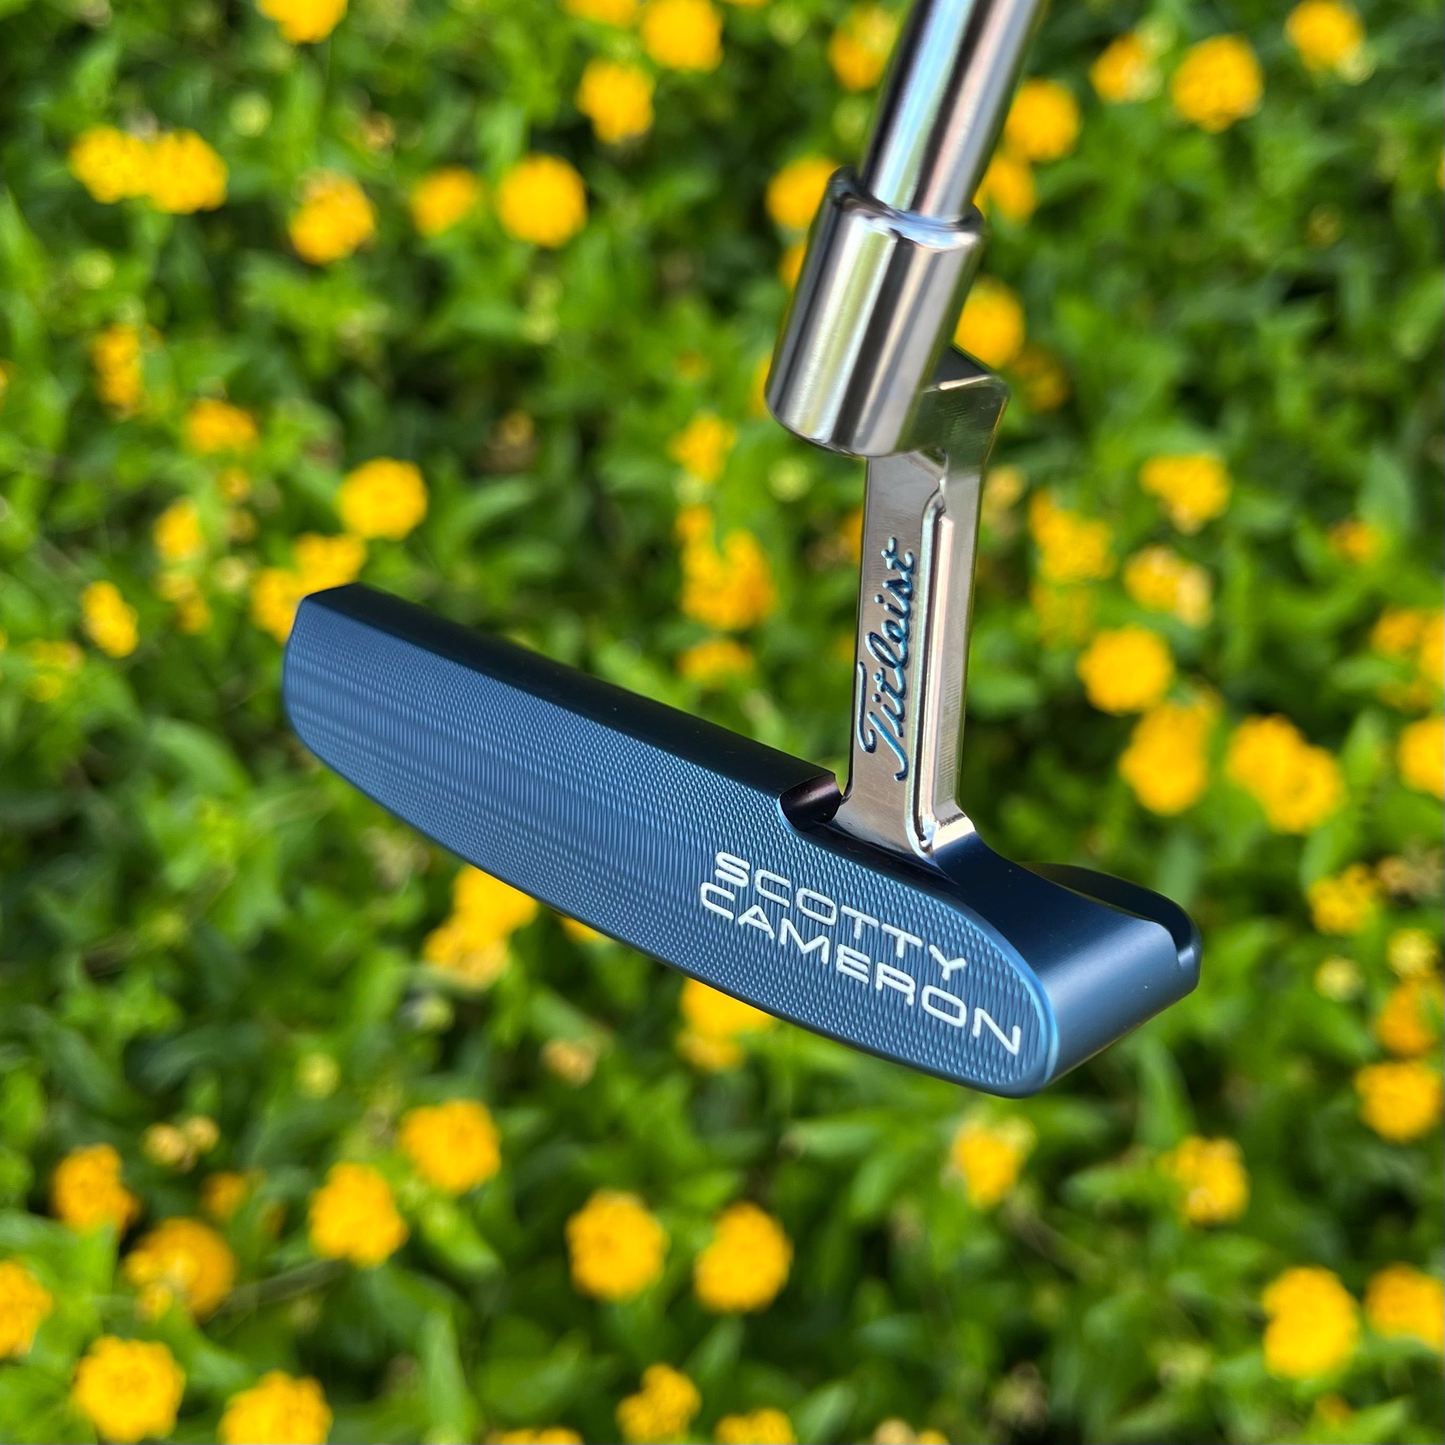 Equipped with live bullet rim! Scotty Cameron 33.5 inch putter blue PVD &amp; chrome finish